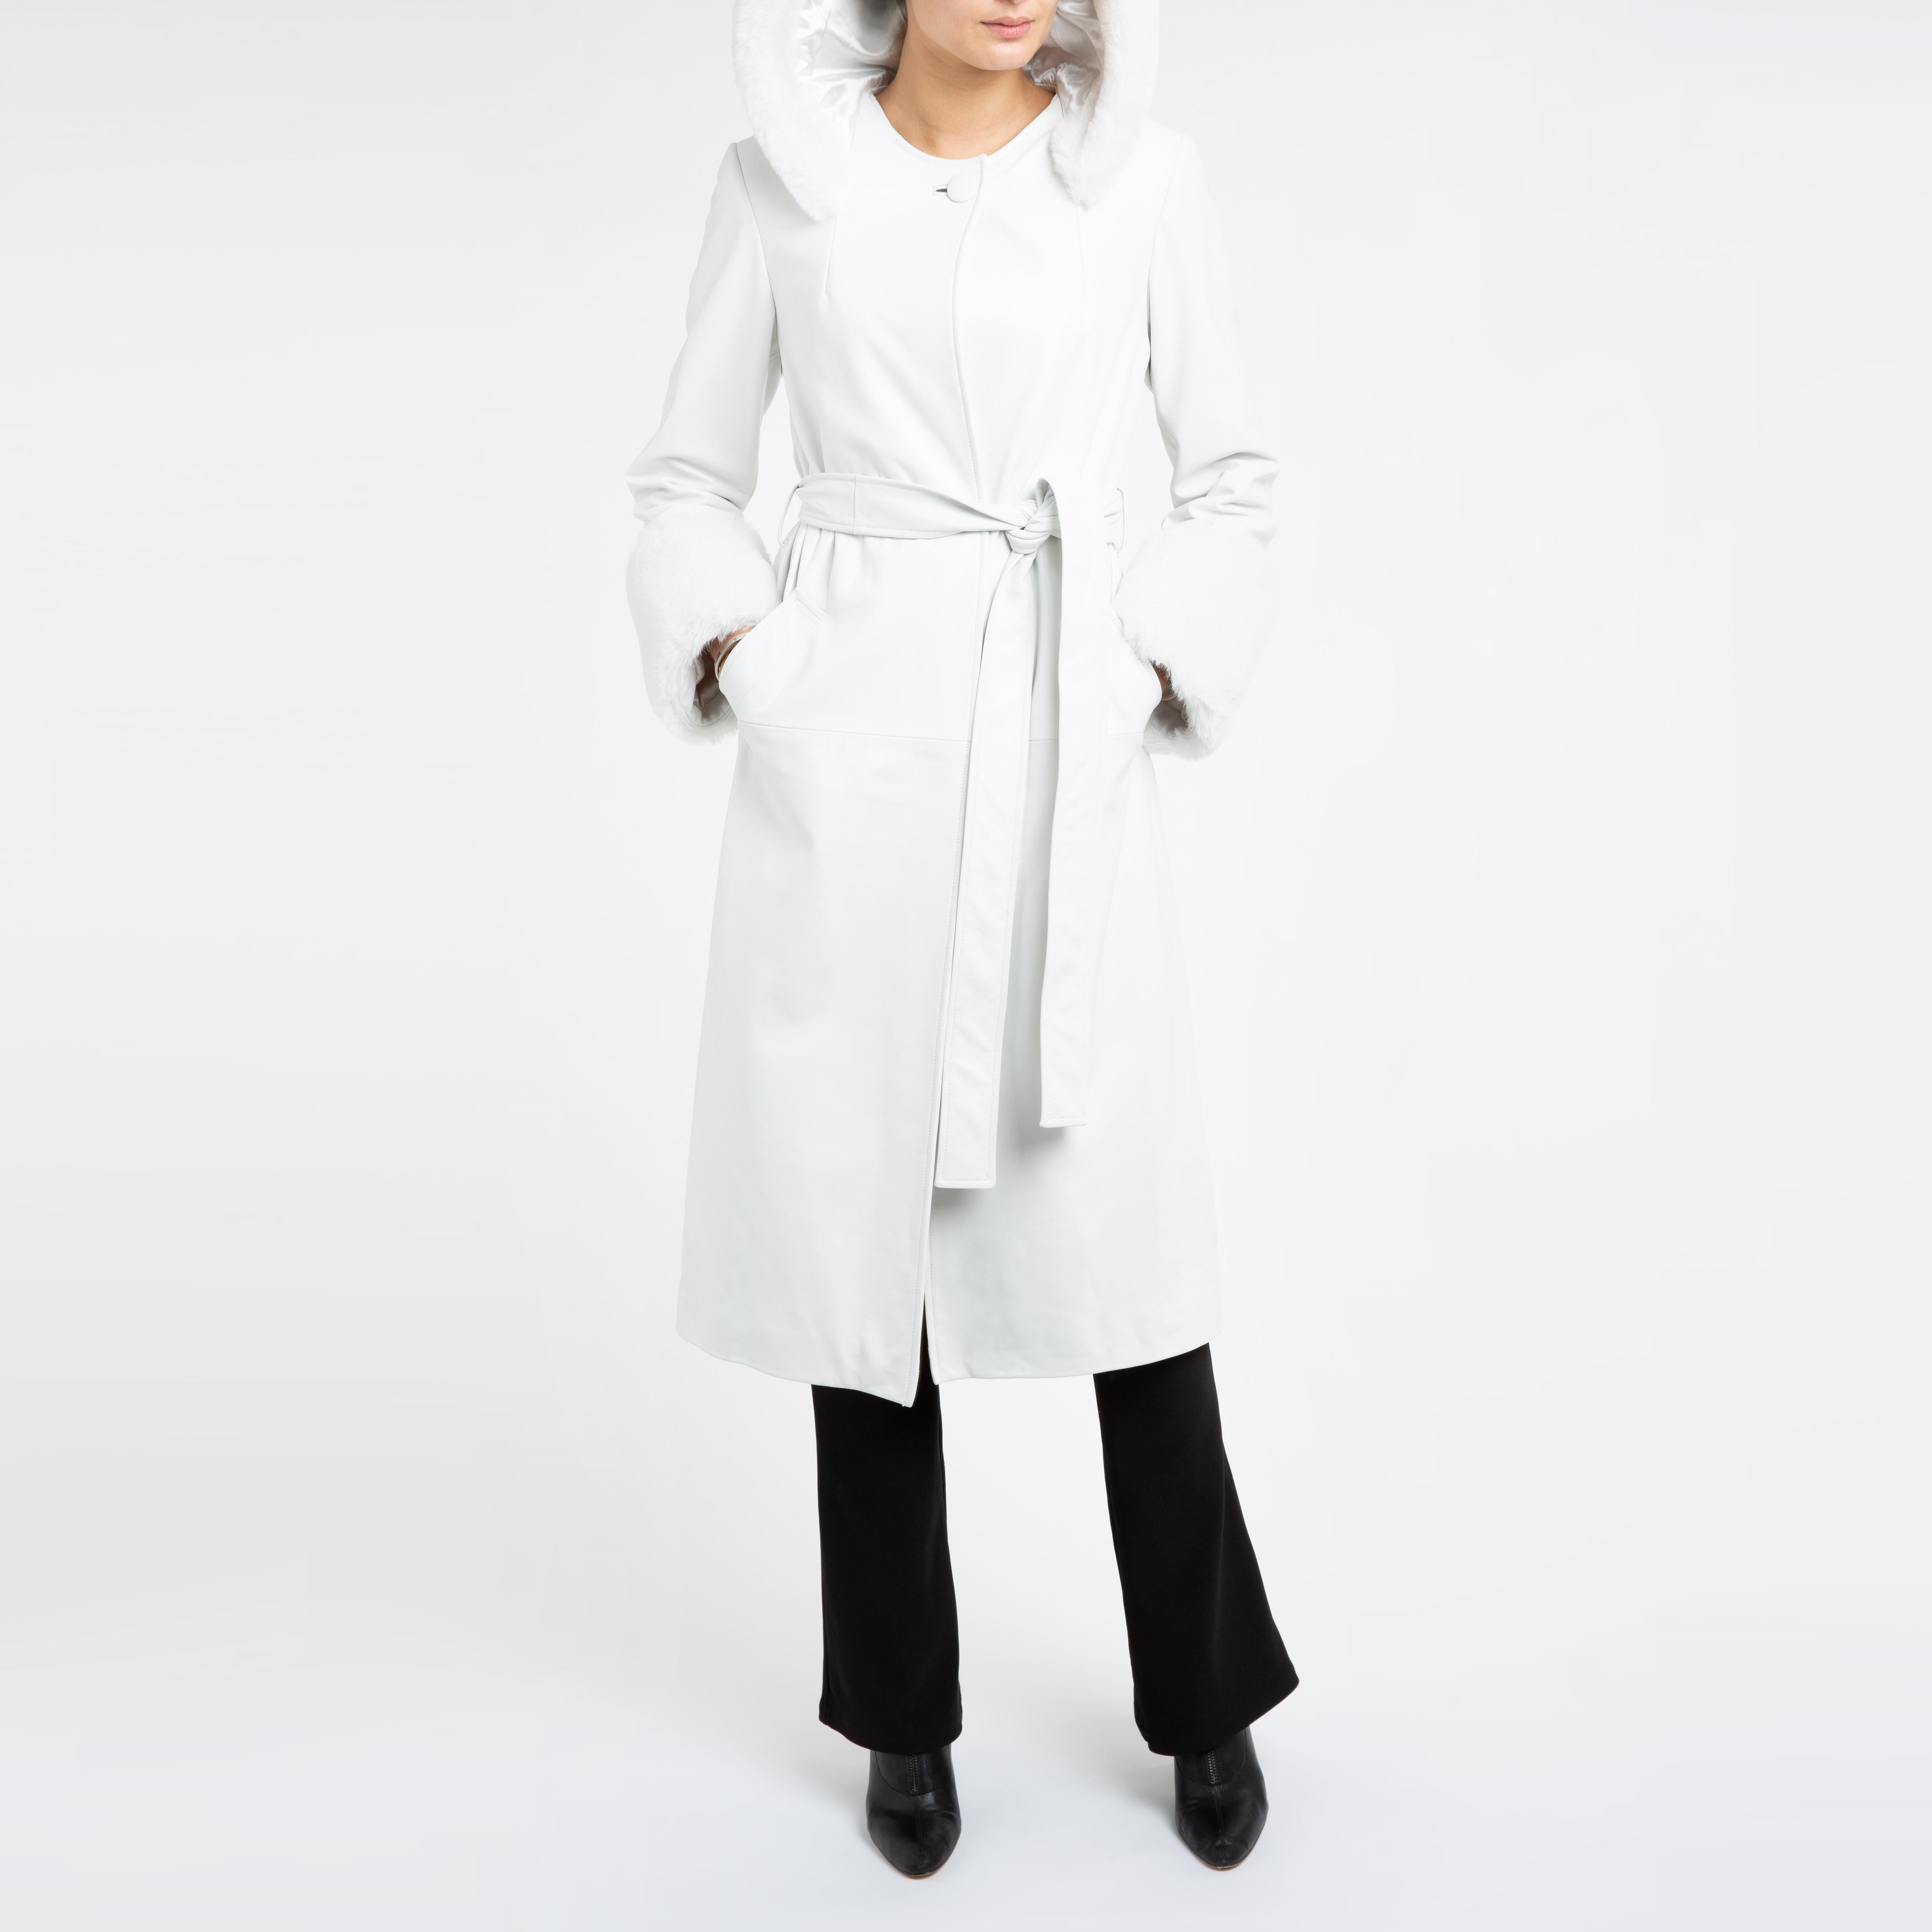 Verheyen Aurora Hooded Leather Trench Coat in White with Faux Fur - Size uk 14 For Sale 6